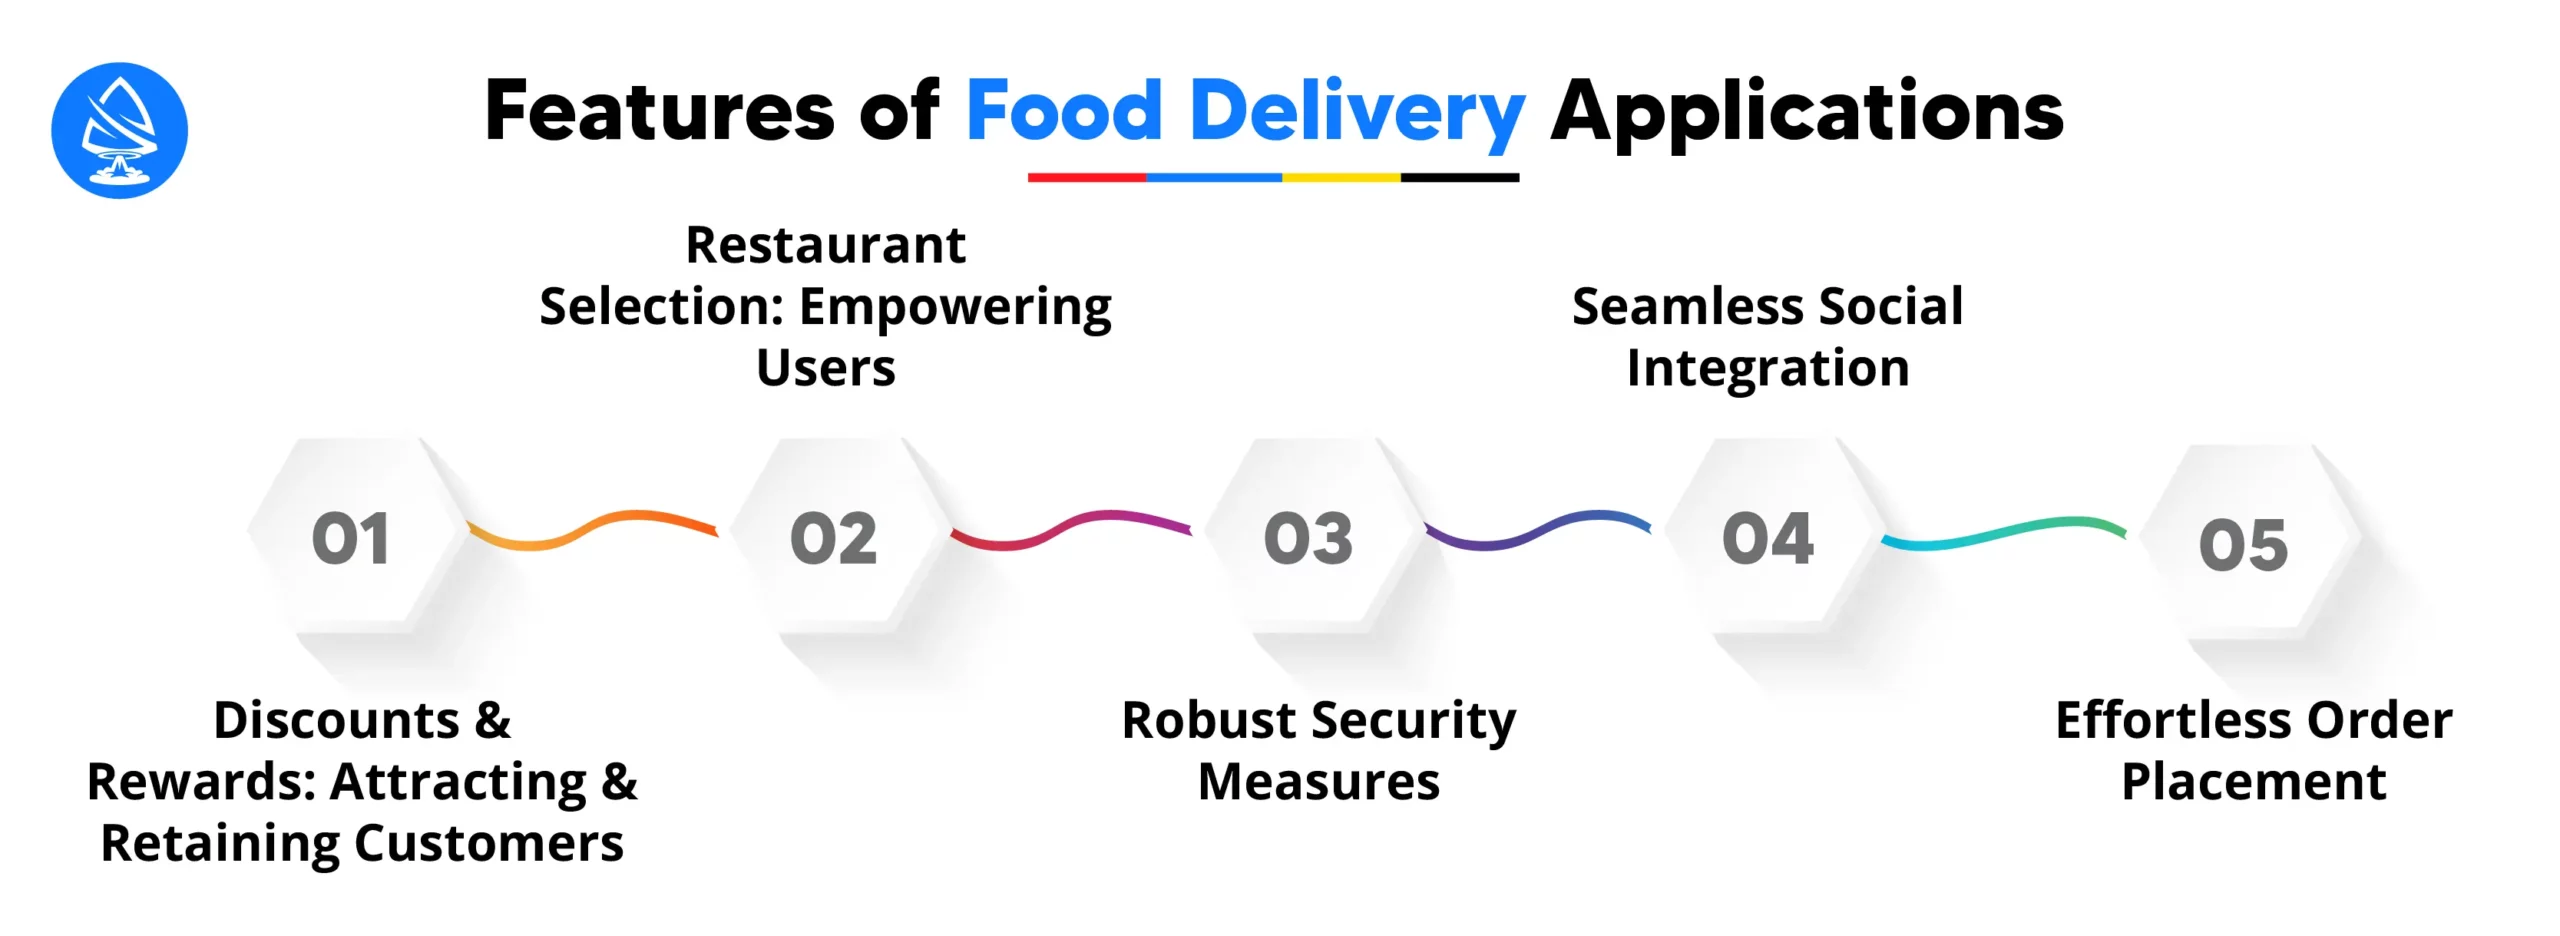 Features of Food Delivery Applications